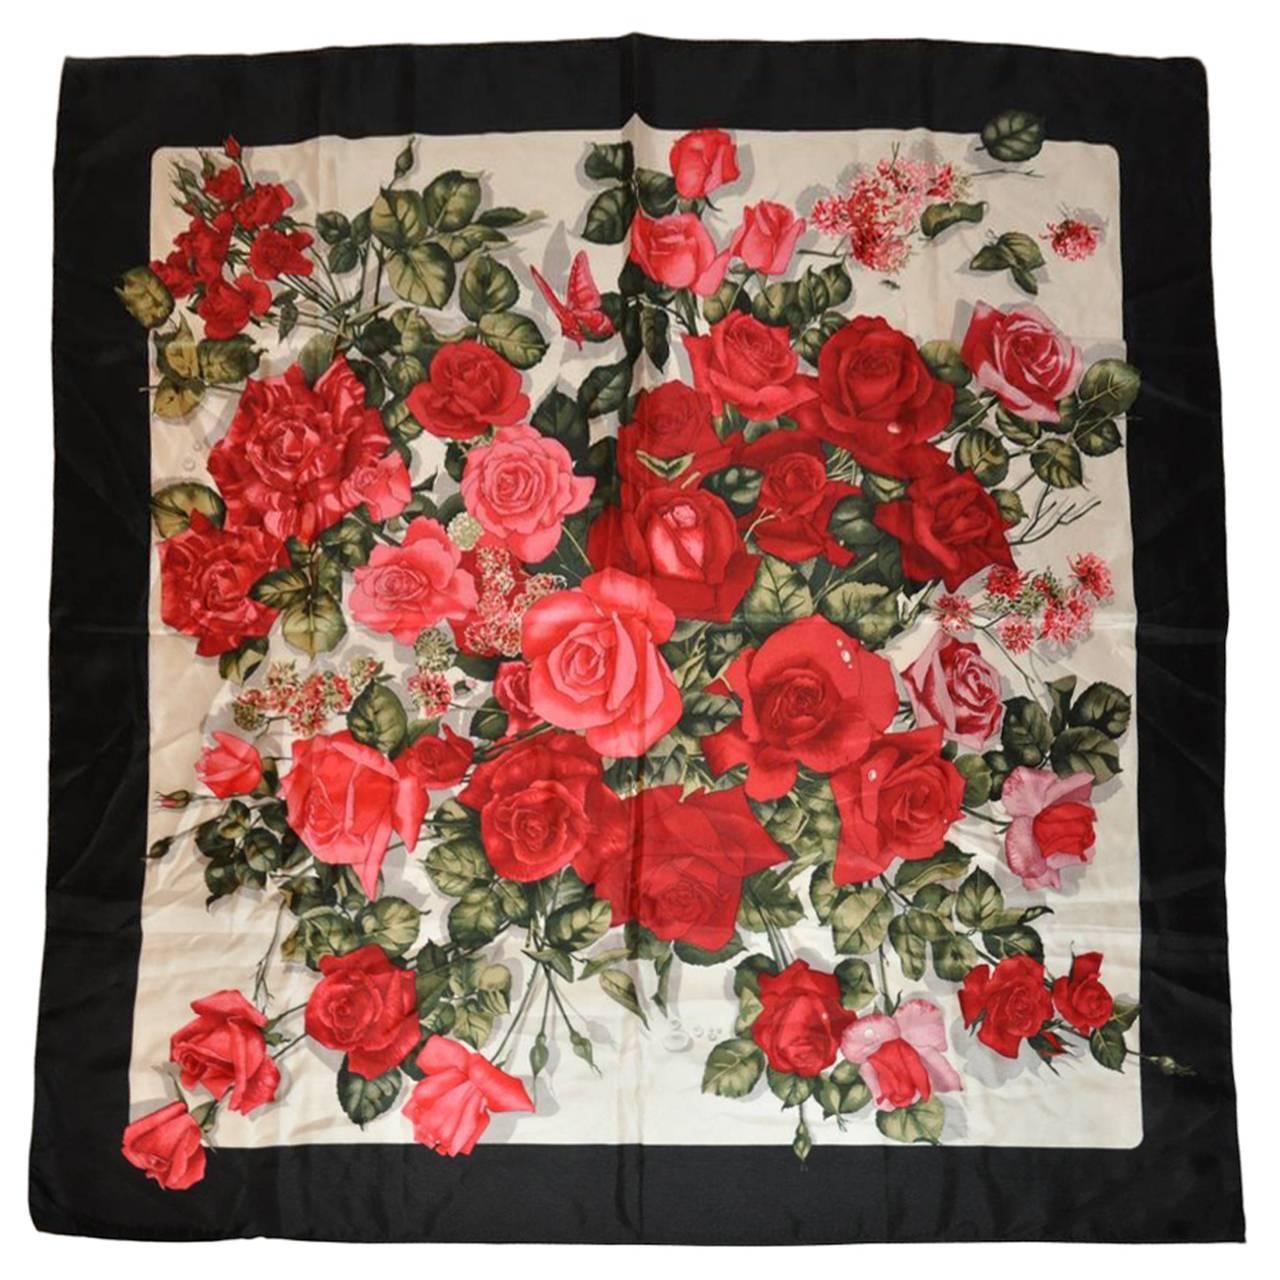 Hiroko for Dozo of Japan "Boutique of Roses" Silk Scarf